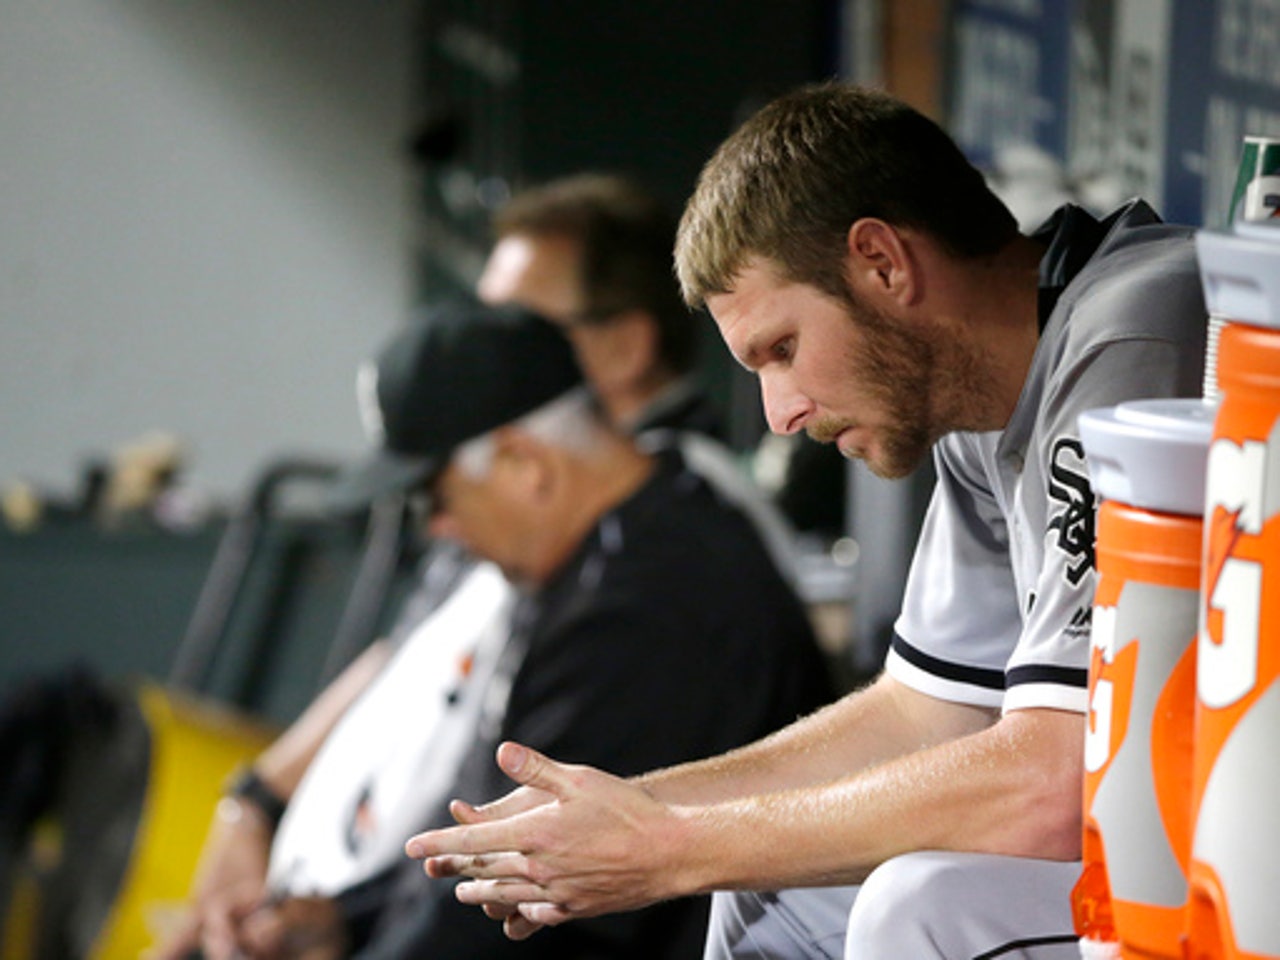 White Sox ace Chris Sale scratched after destroying throwback jerseys